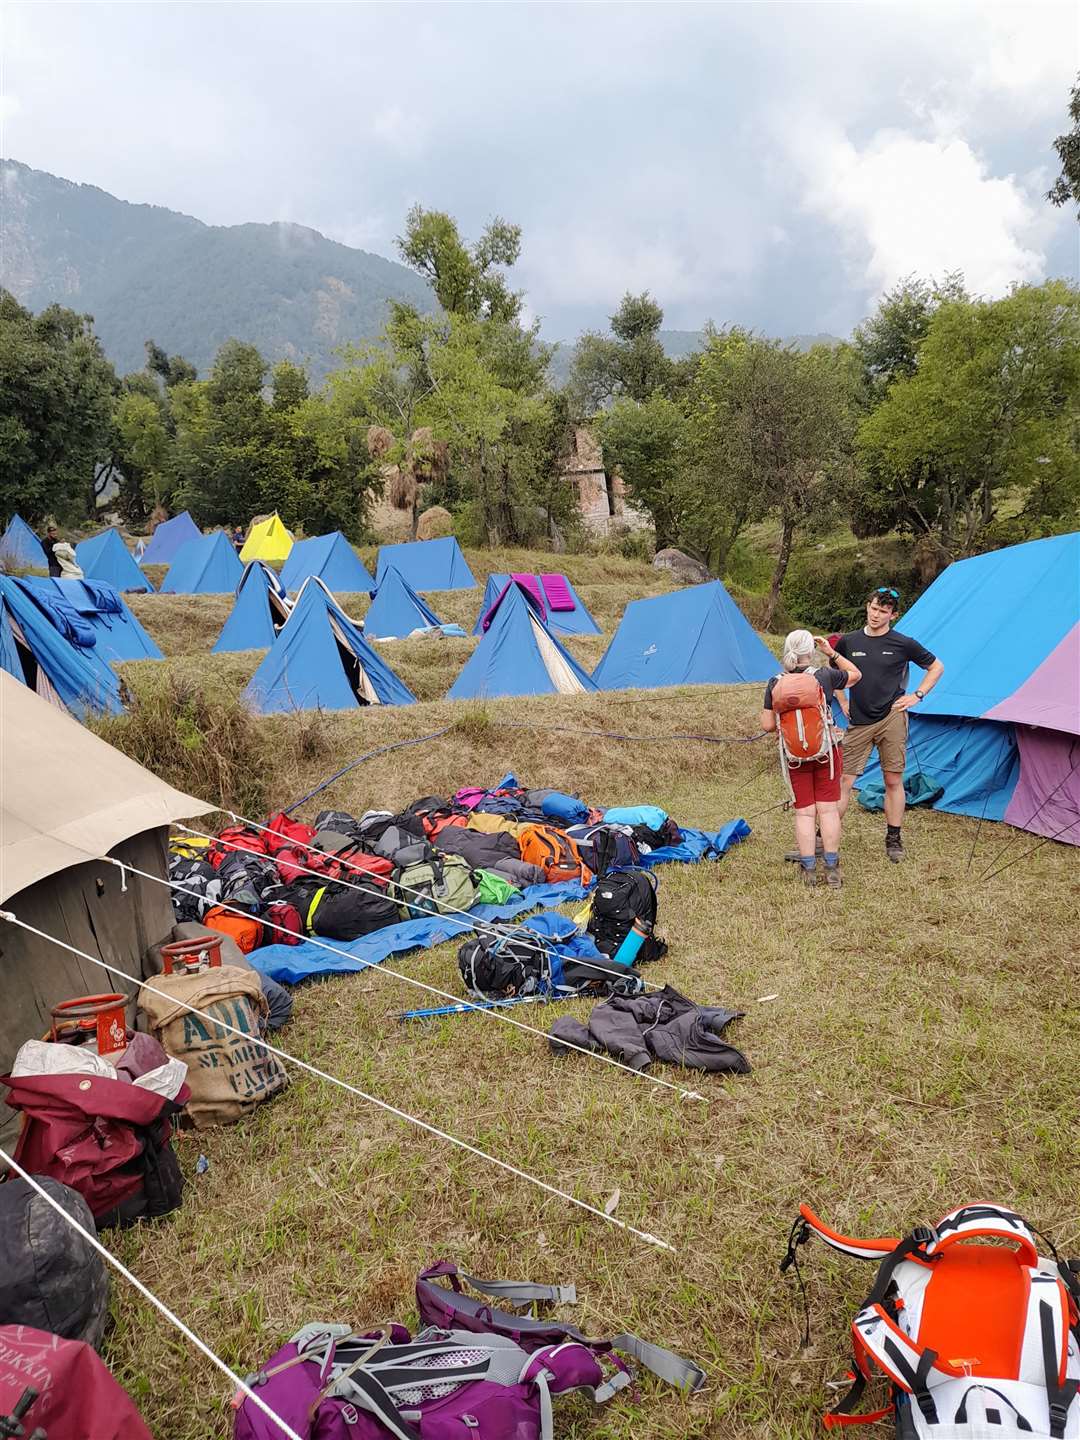 The group had a base at Dharamshala but spent a number of nights in tents.